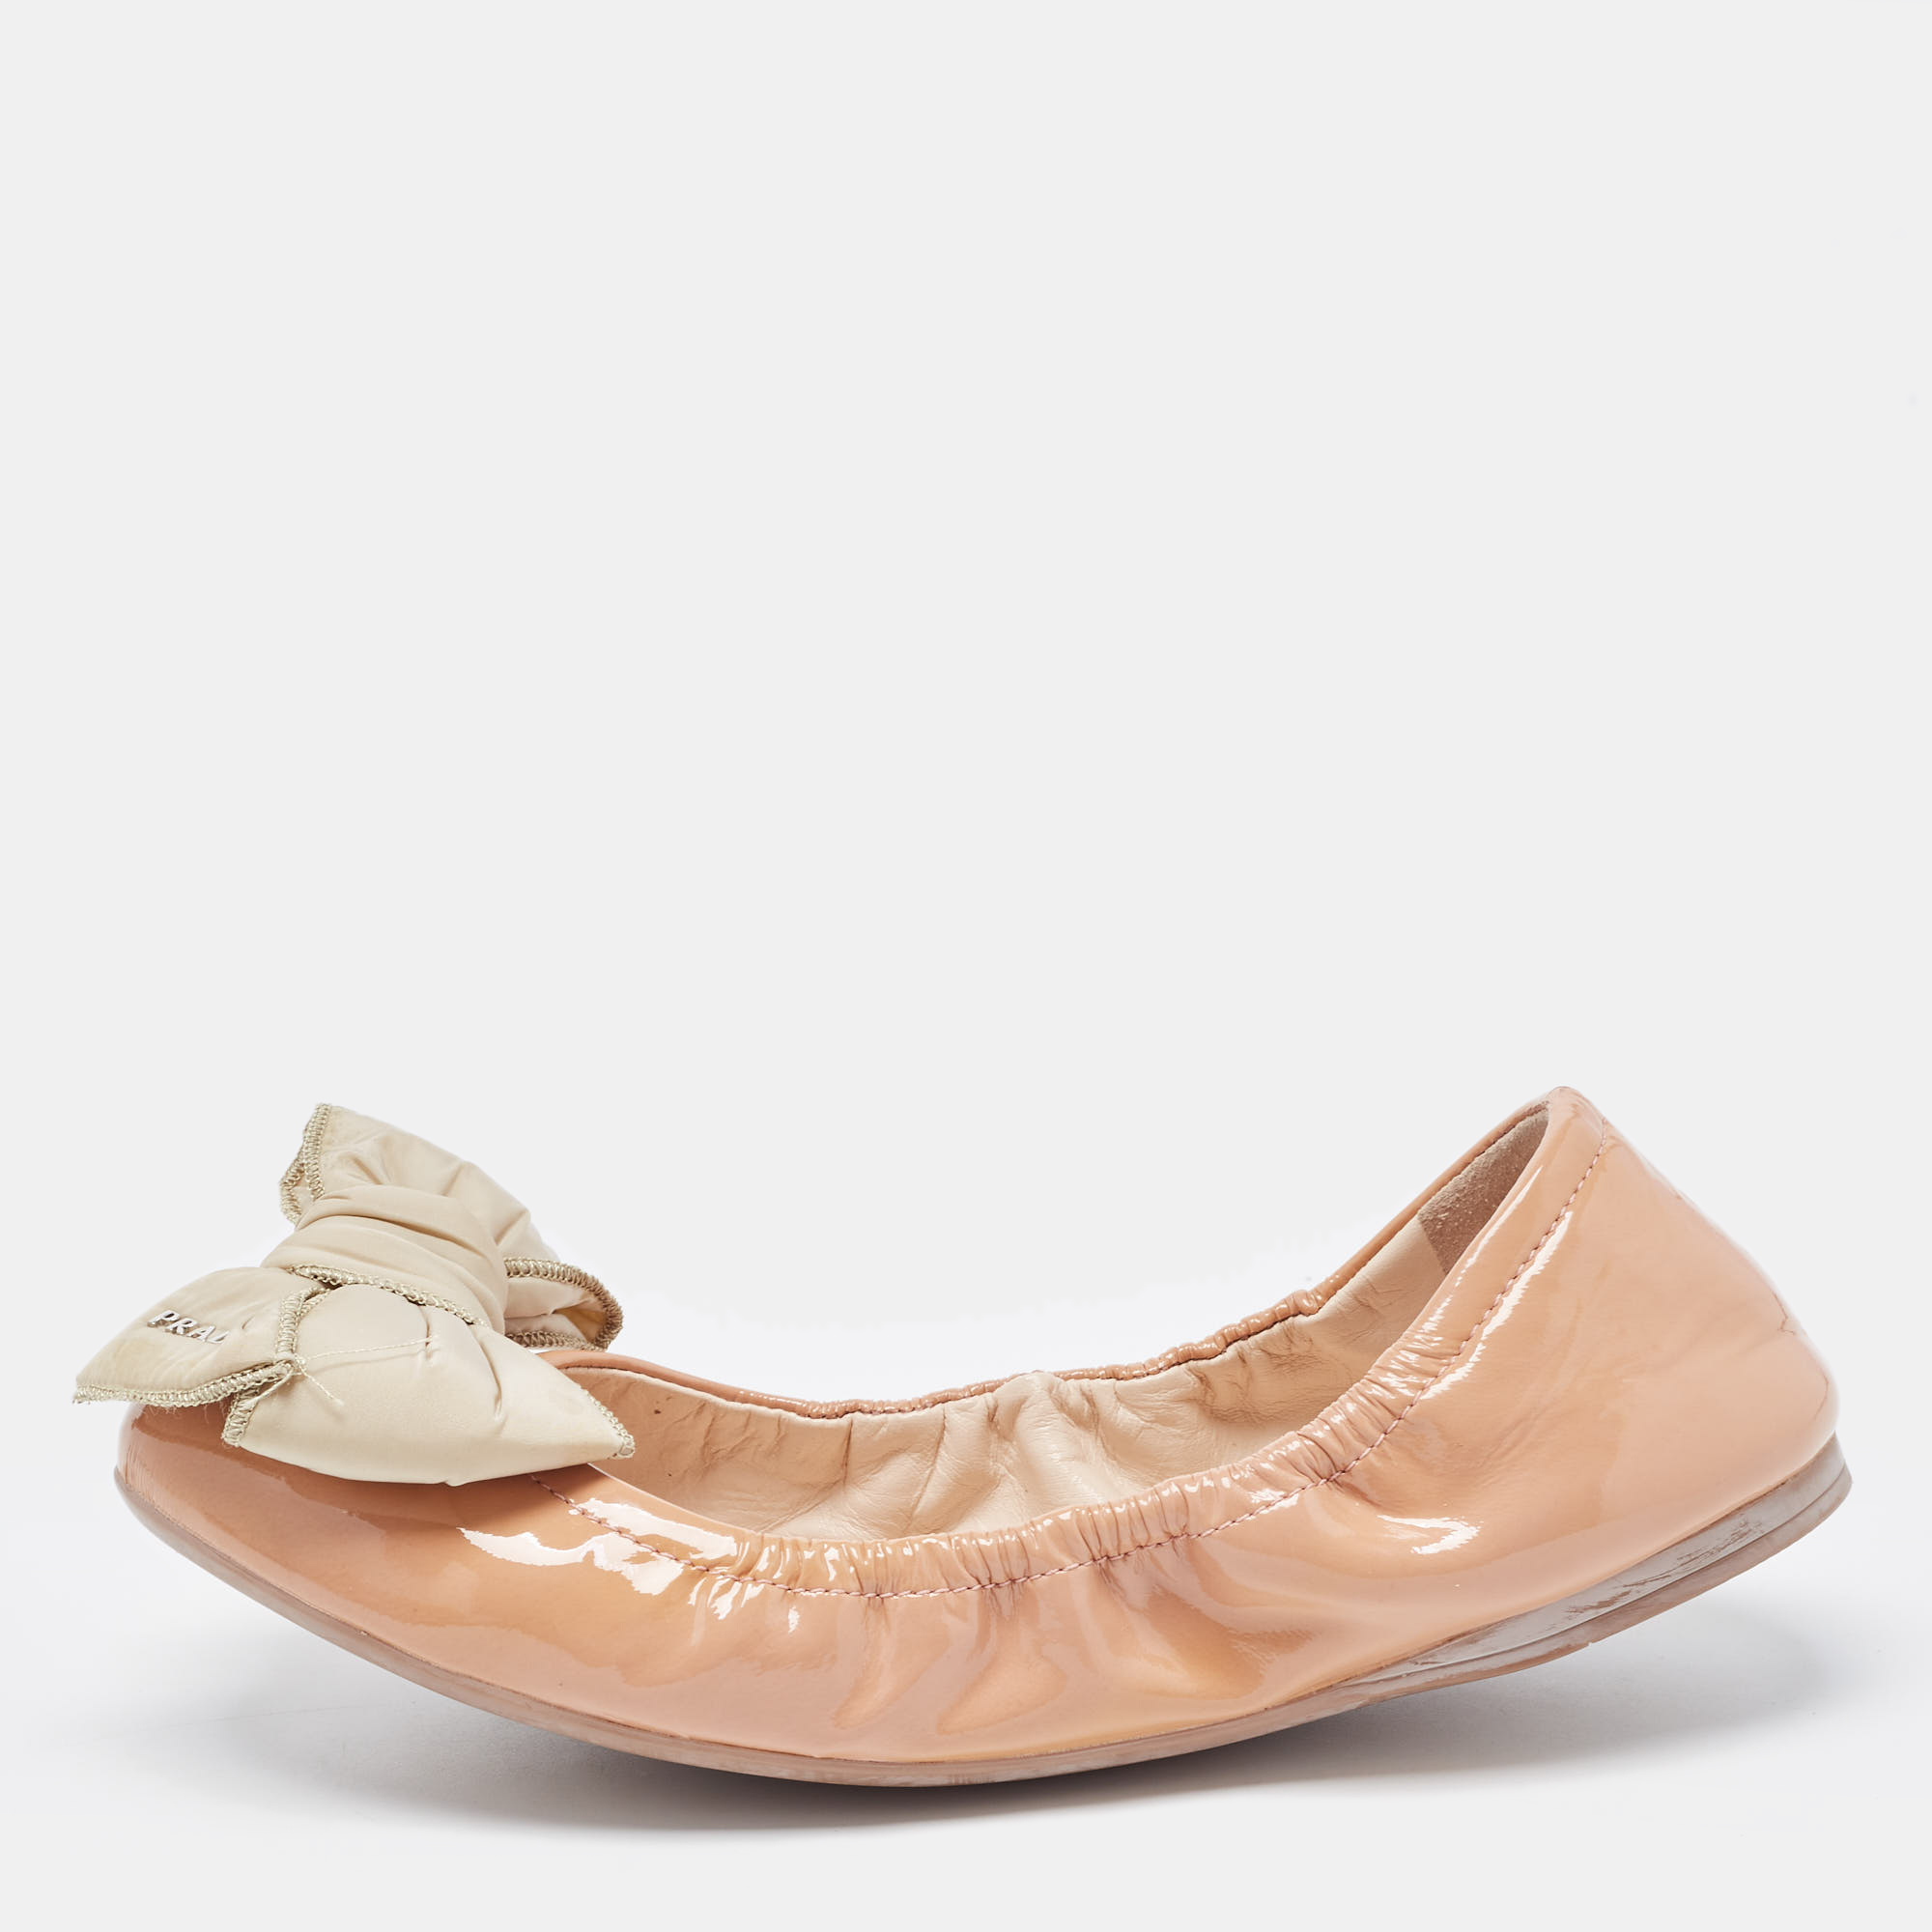 Pre-owned Prada Beige Patent Leather Bow Scrunch Ballet Flats Size 36.5